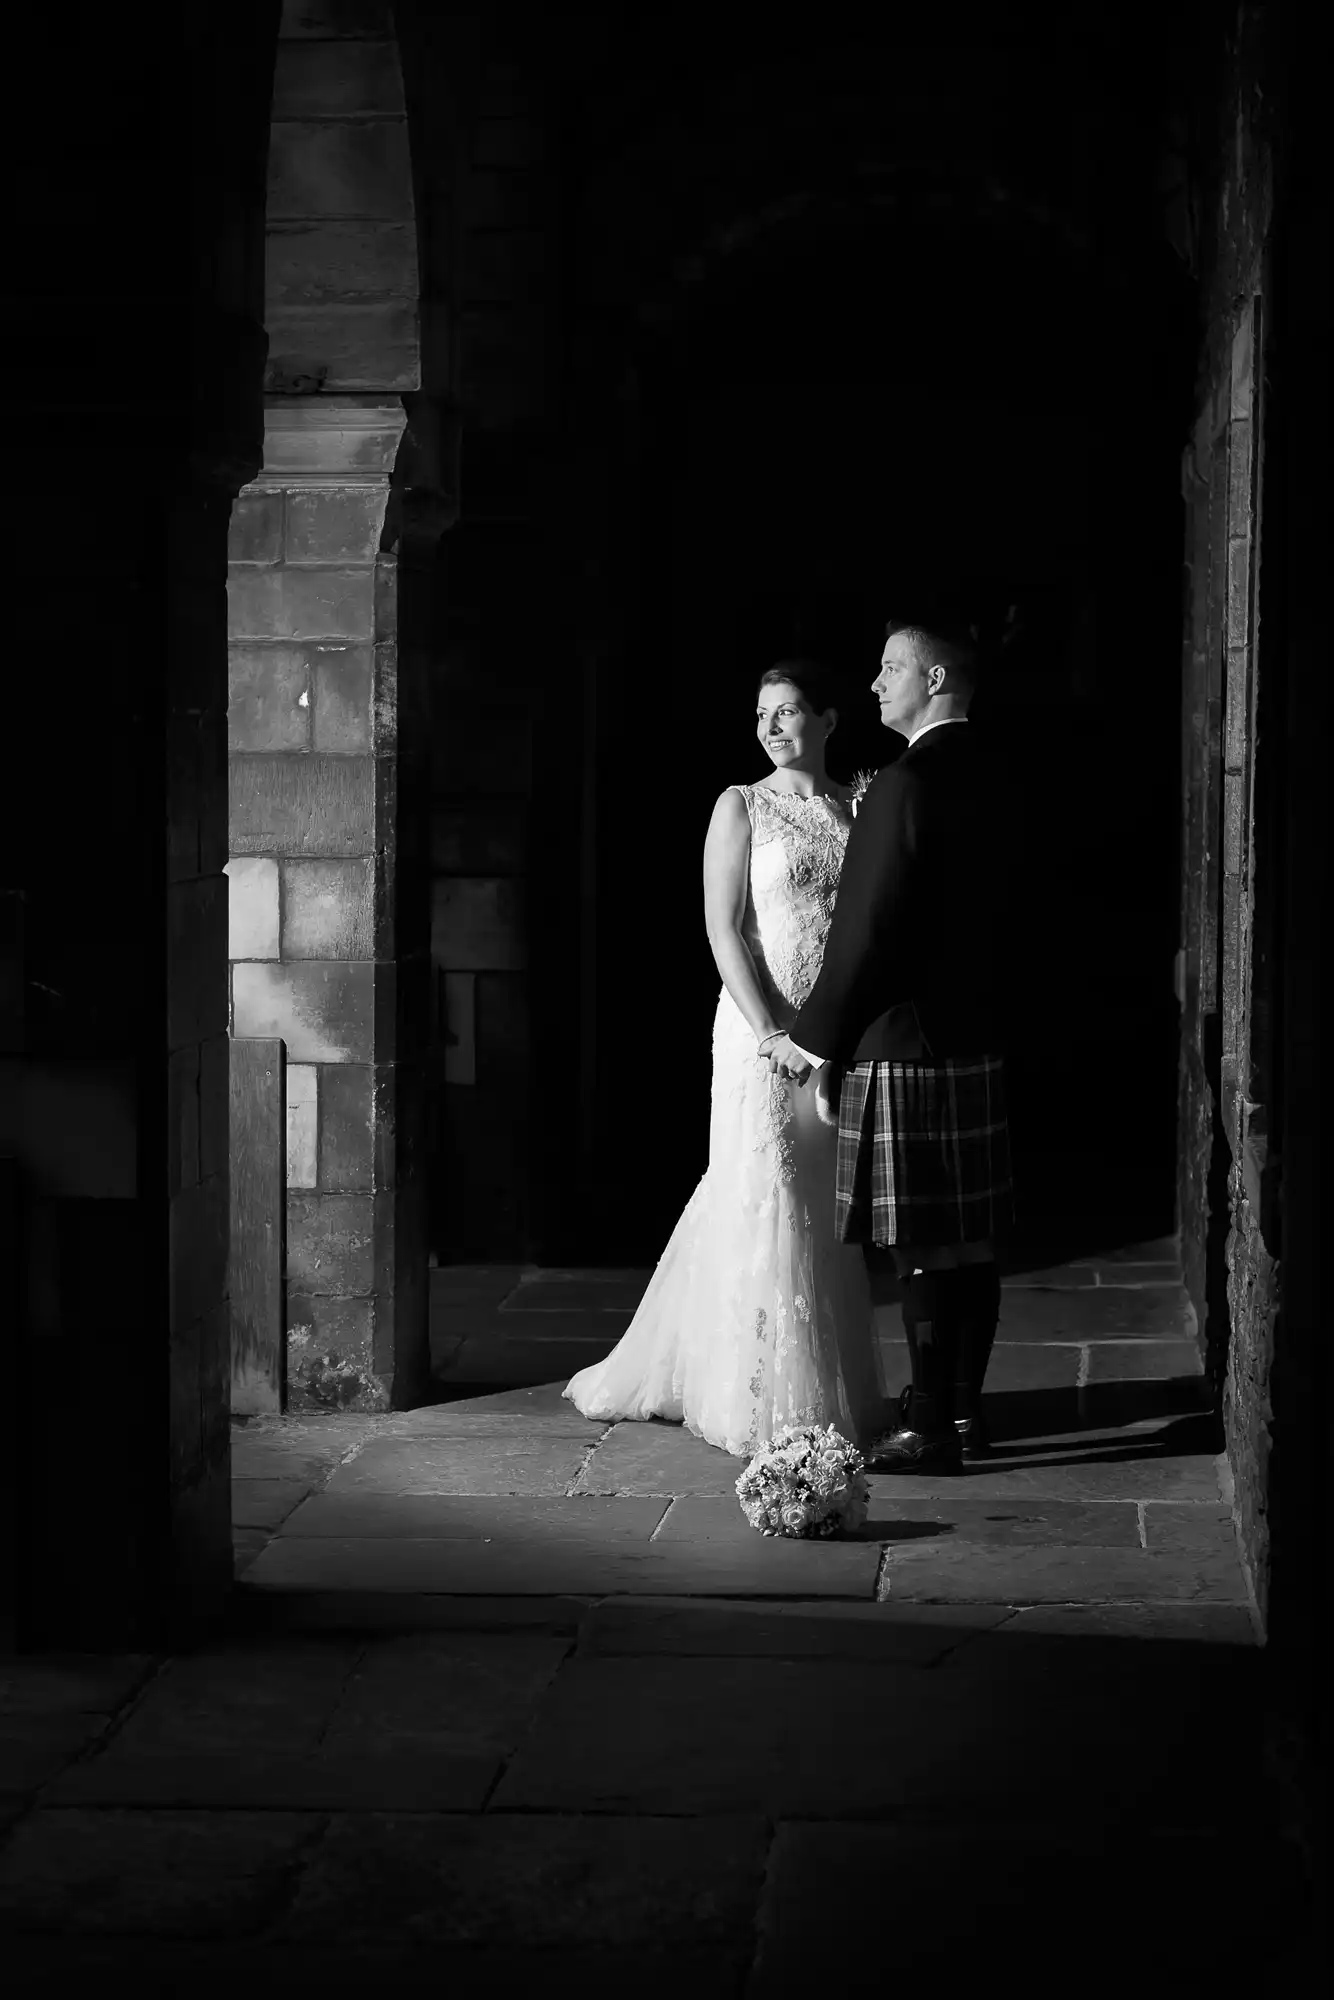 A bride in a white dress and a groom in a kilt stand in a dimly lit archway, illuminated by soft light, exchanging a tender look.